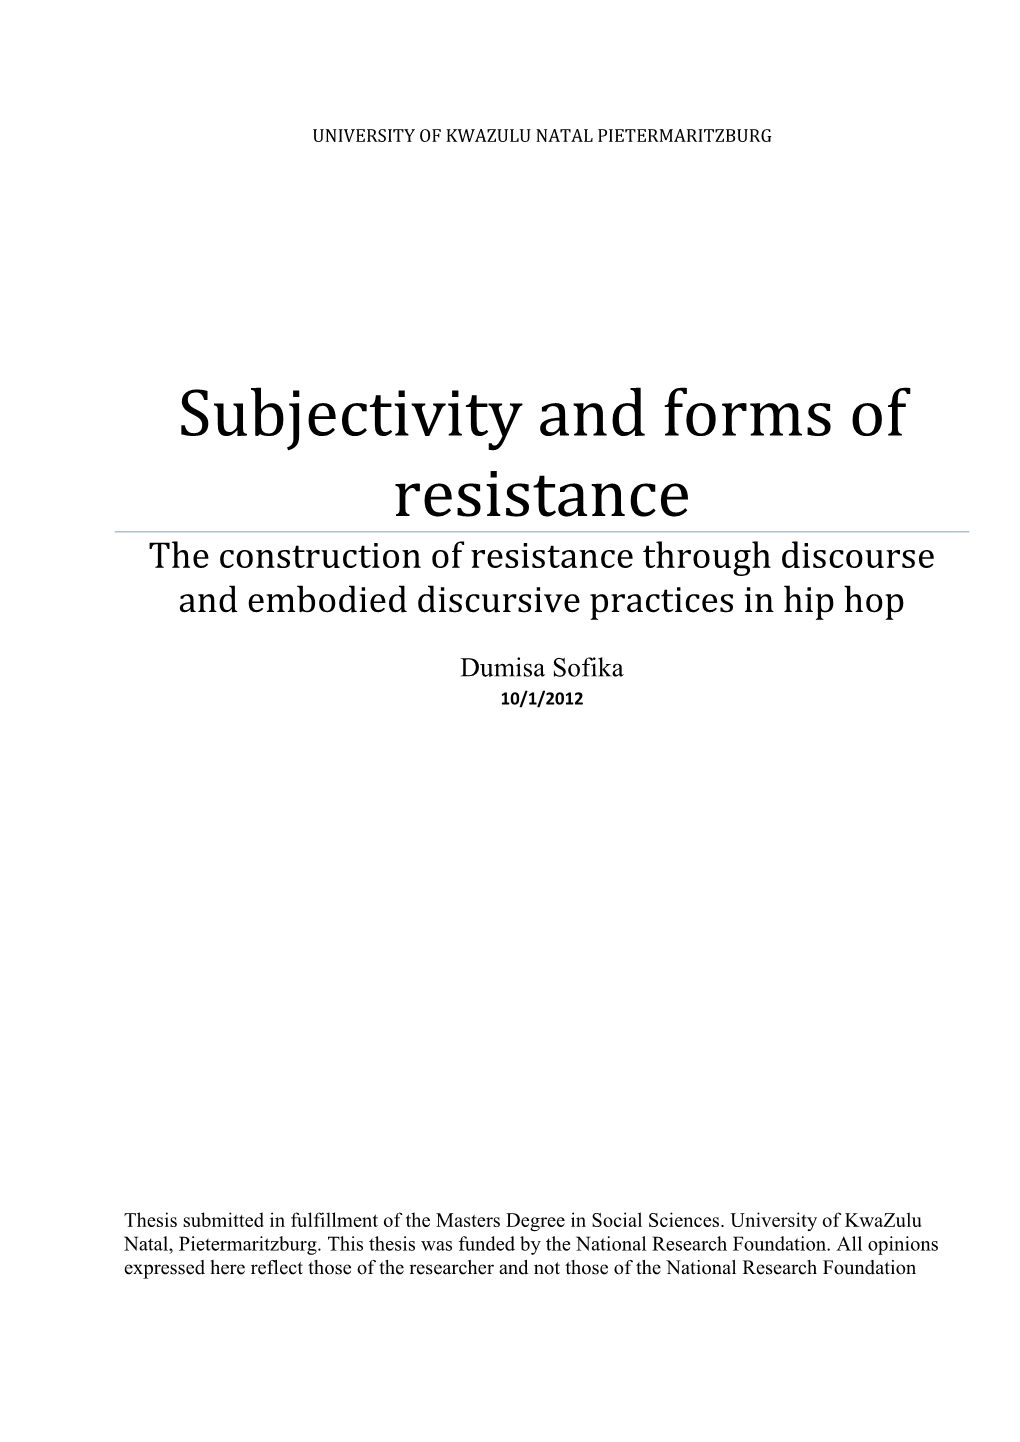 Subjectivity and Forms of Resistance the Construction of Resistance Through Discourse and Embodied Discursive Practices in Hip Hop